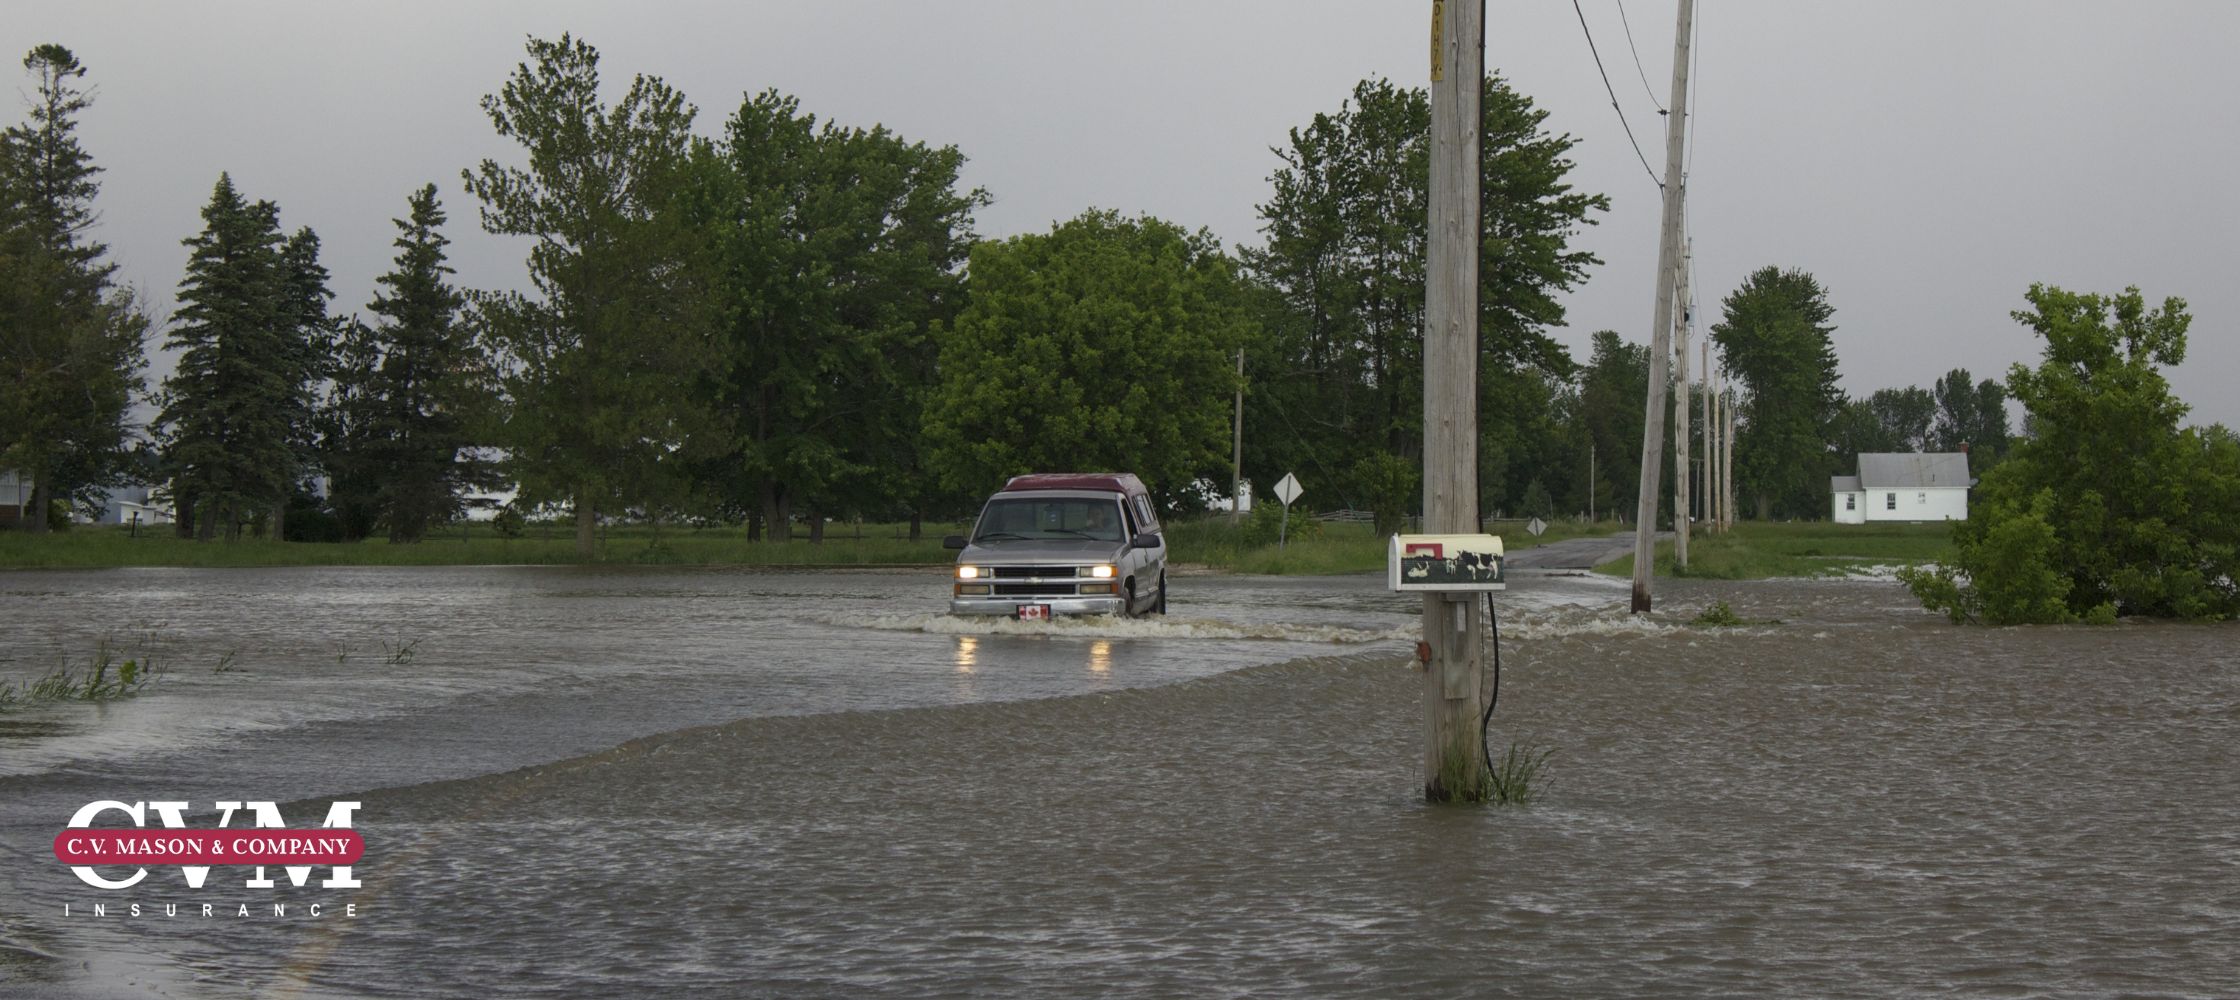 Does Your Car Insurance Protect Against Water Damage?